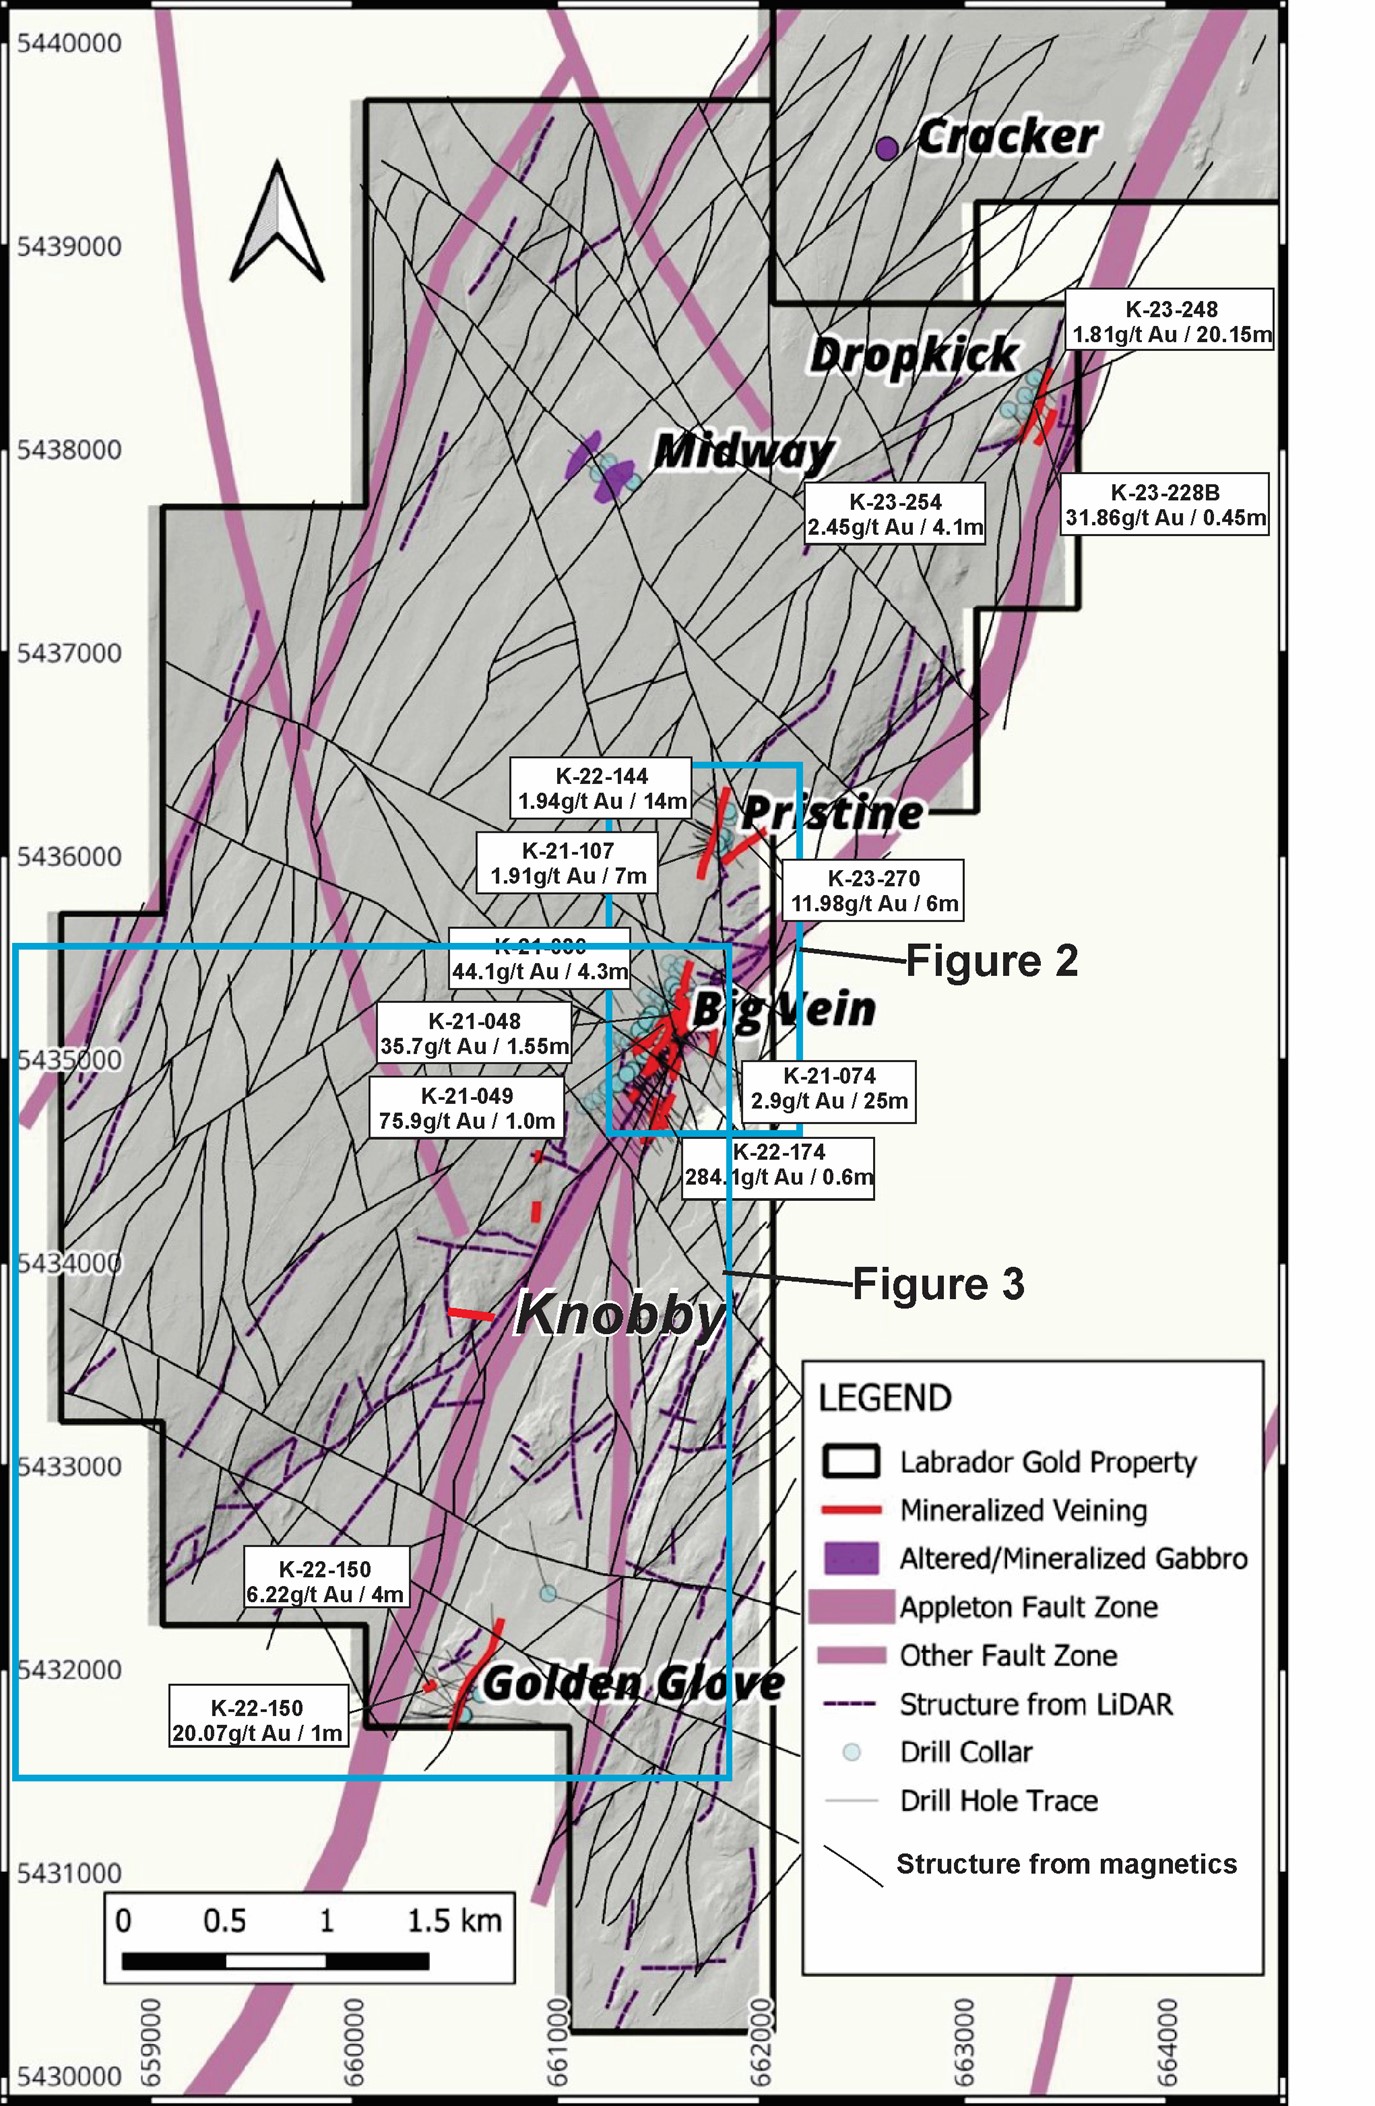 LabGold discoveries along the Appleton Fault Zone.